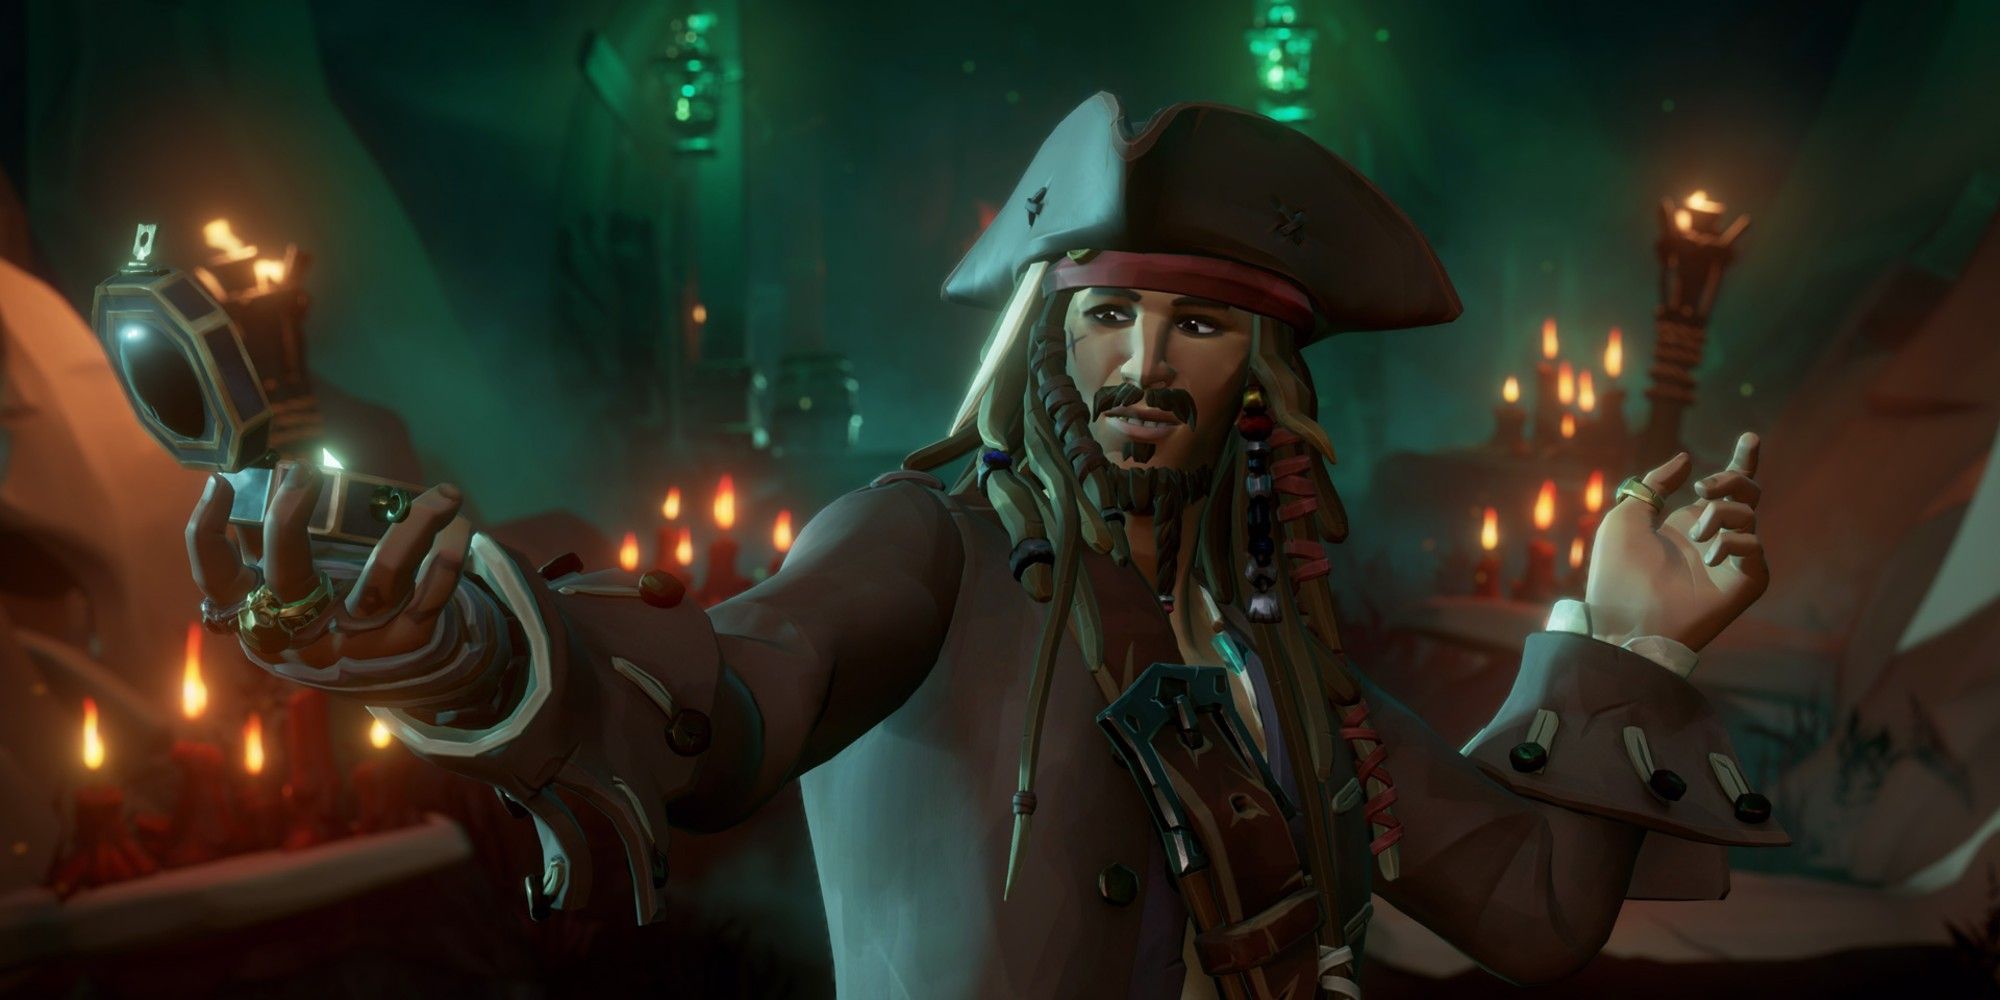 Jack Sparrow examines his compass in Sea of Thieves